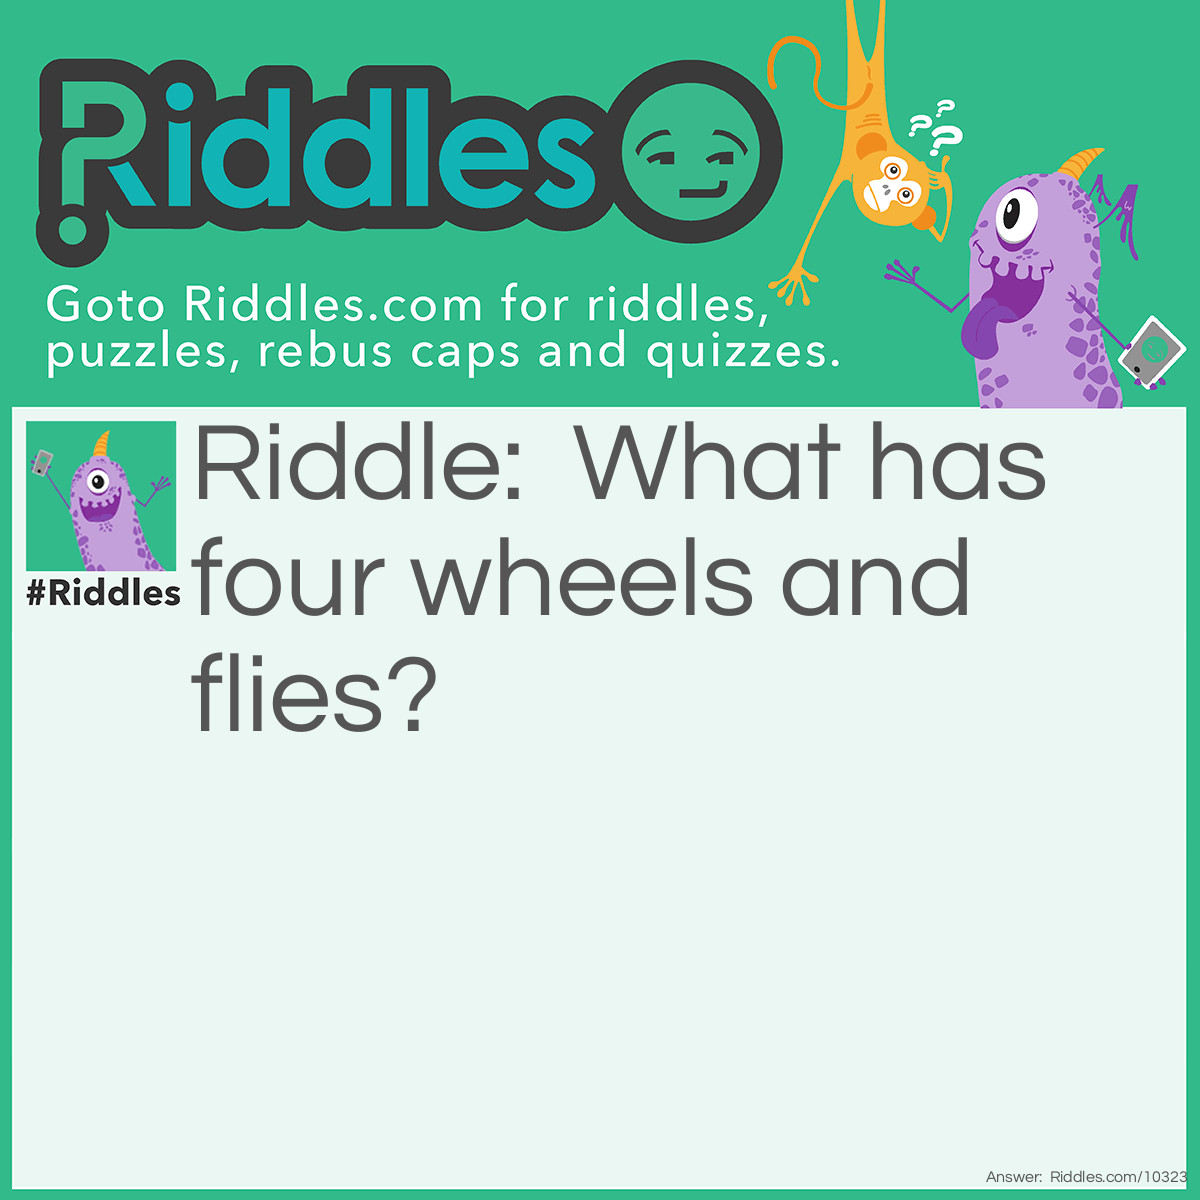 Riddle: What has four wheels and flies? Answer: A garbage truck.